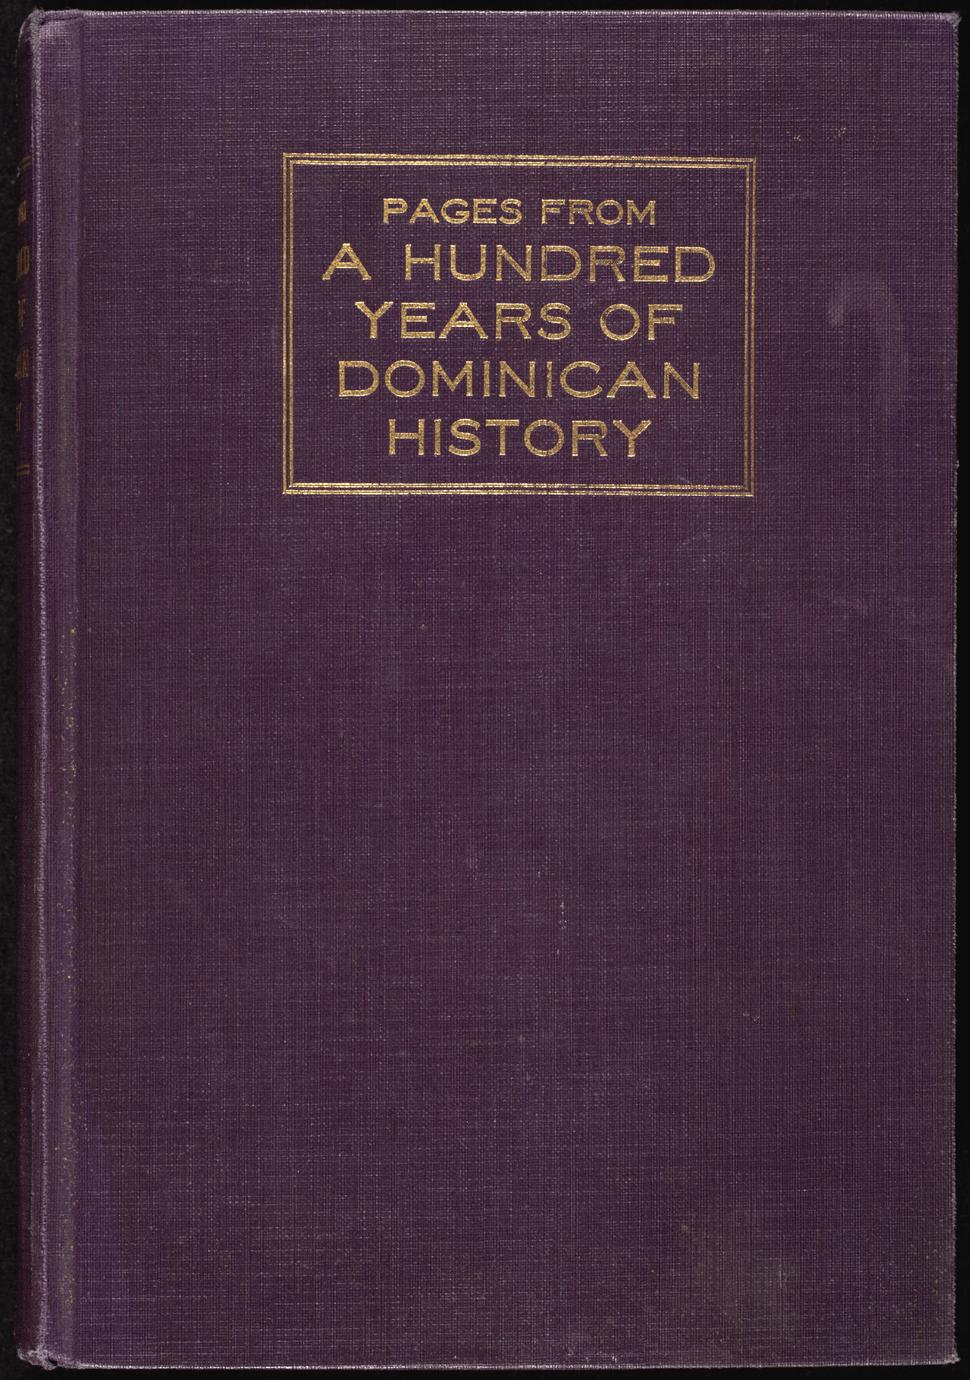 Pages from a hundred years of Dominican history : the story of the Congregation of Saint Catharine of Sienna (1 of 3)